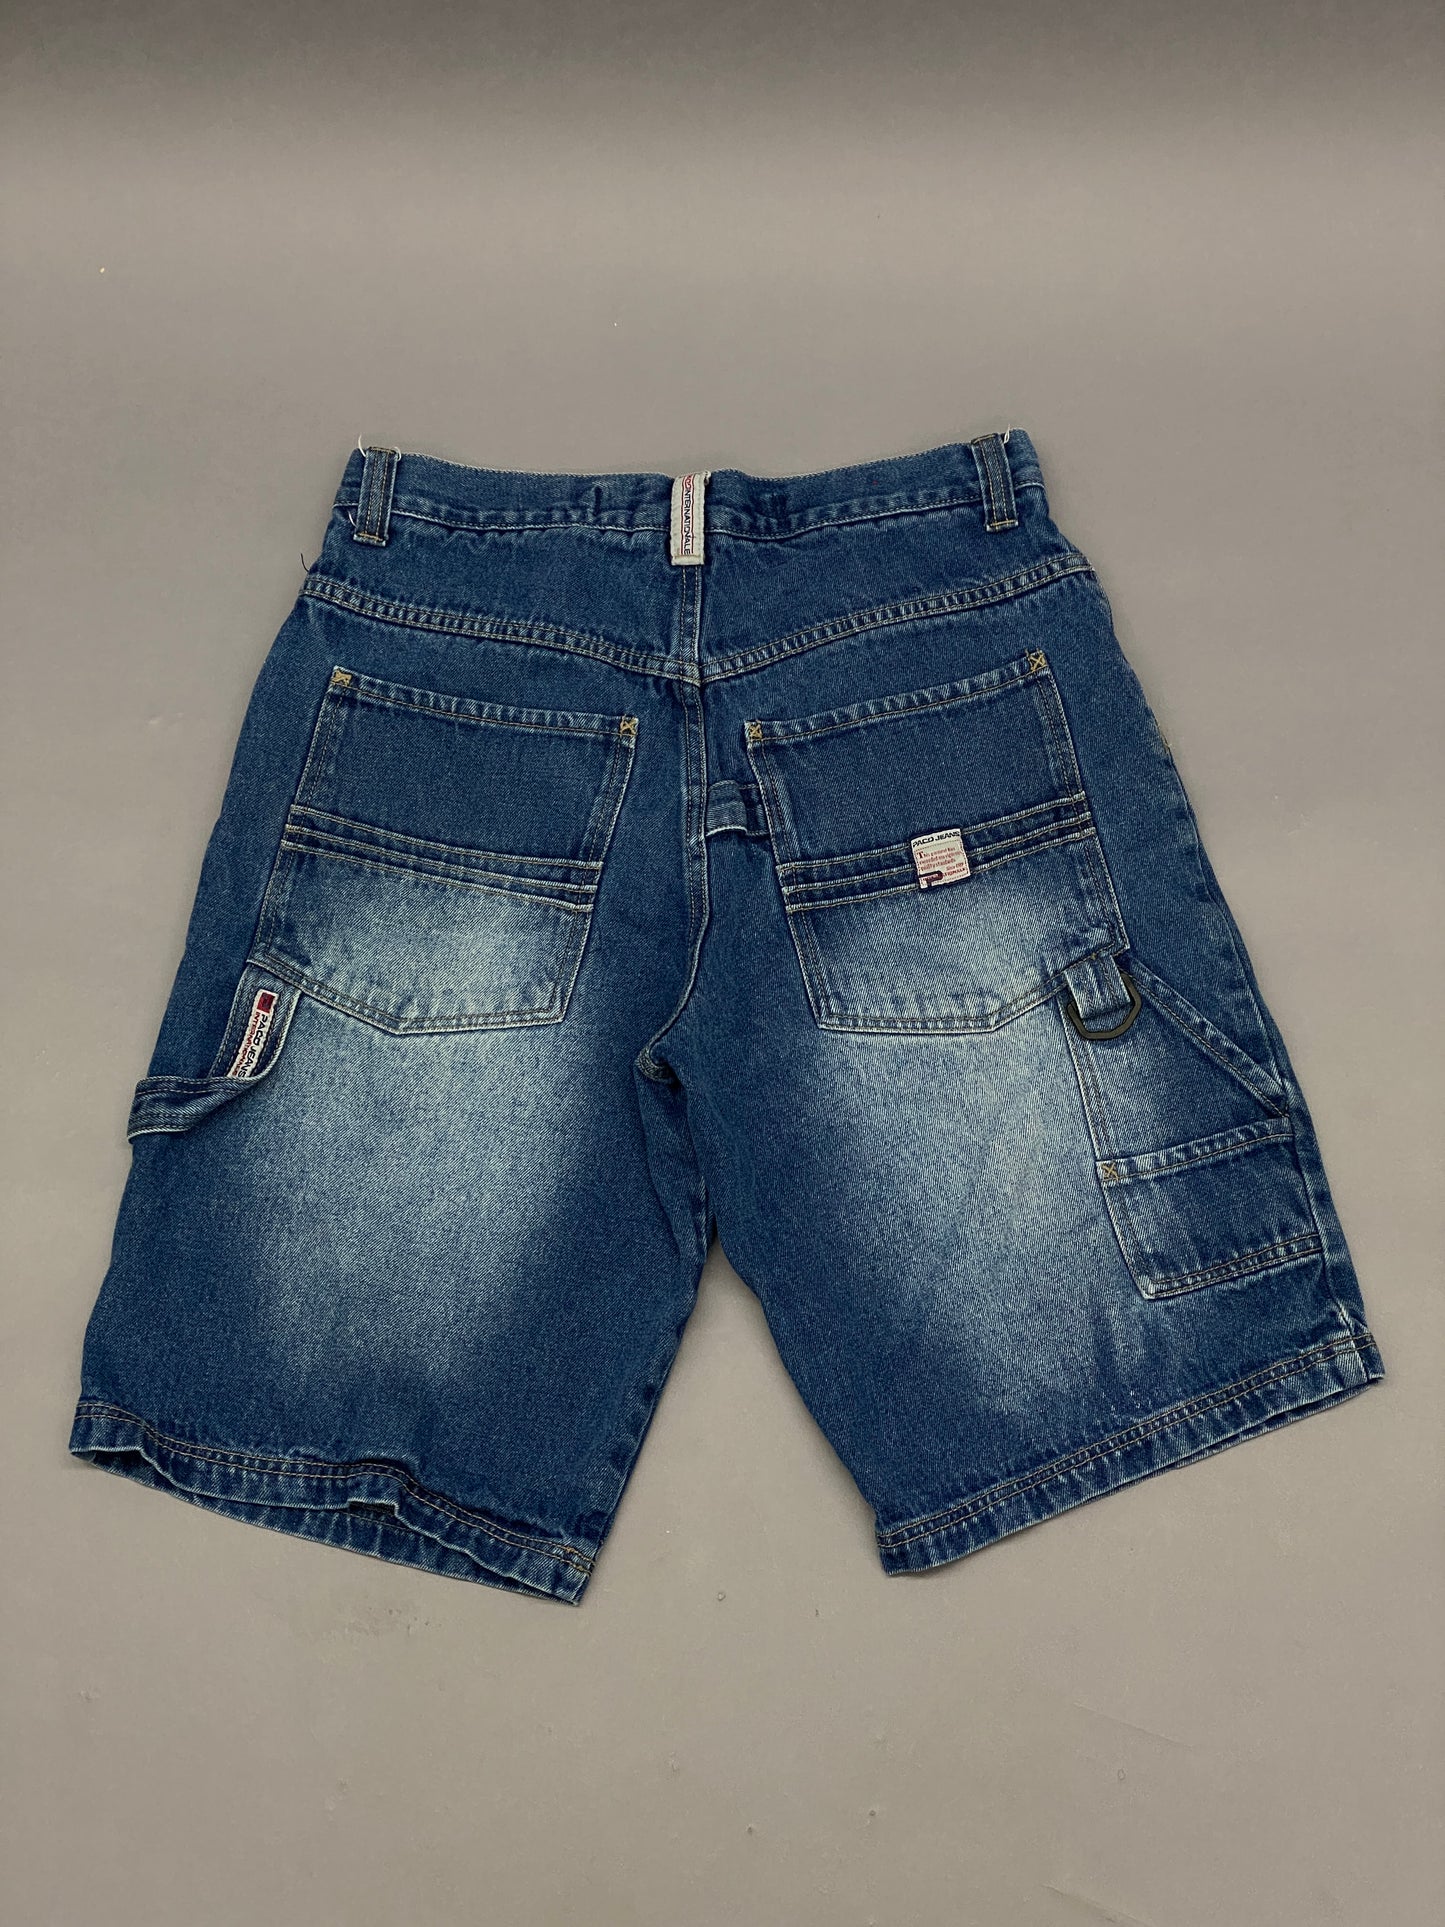 Paco Jeans Vintage Shorts - 34